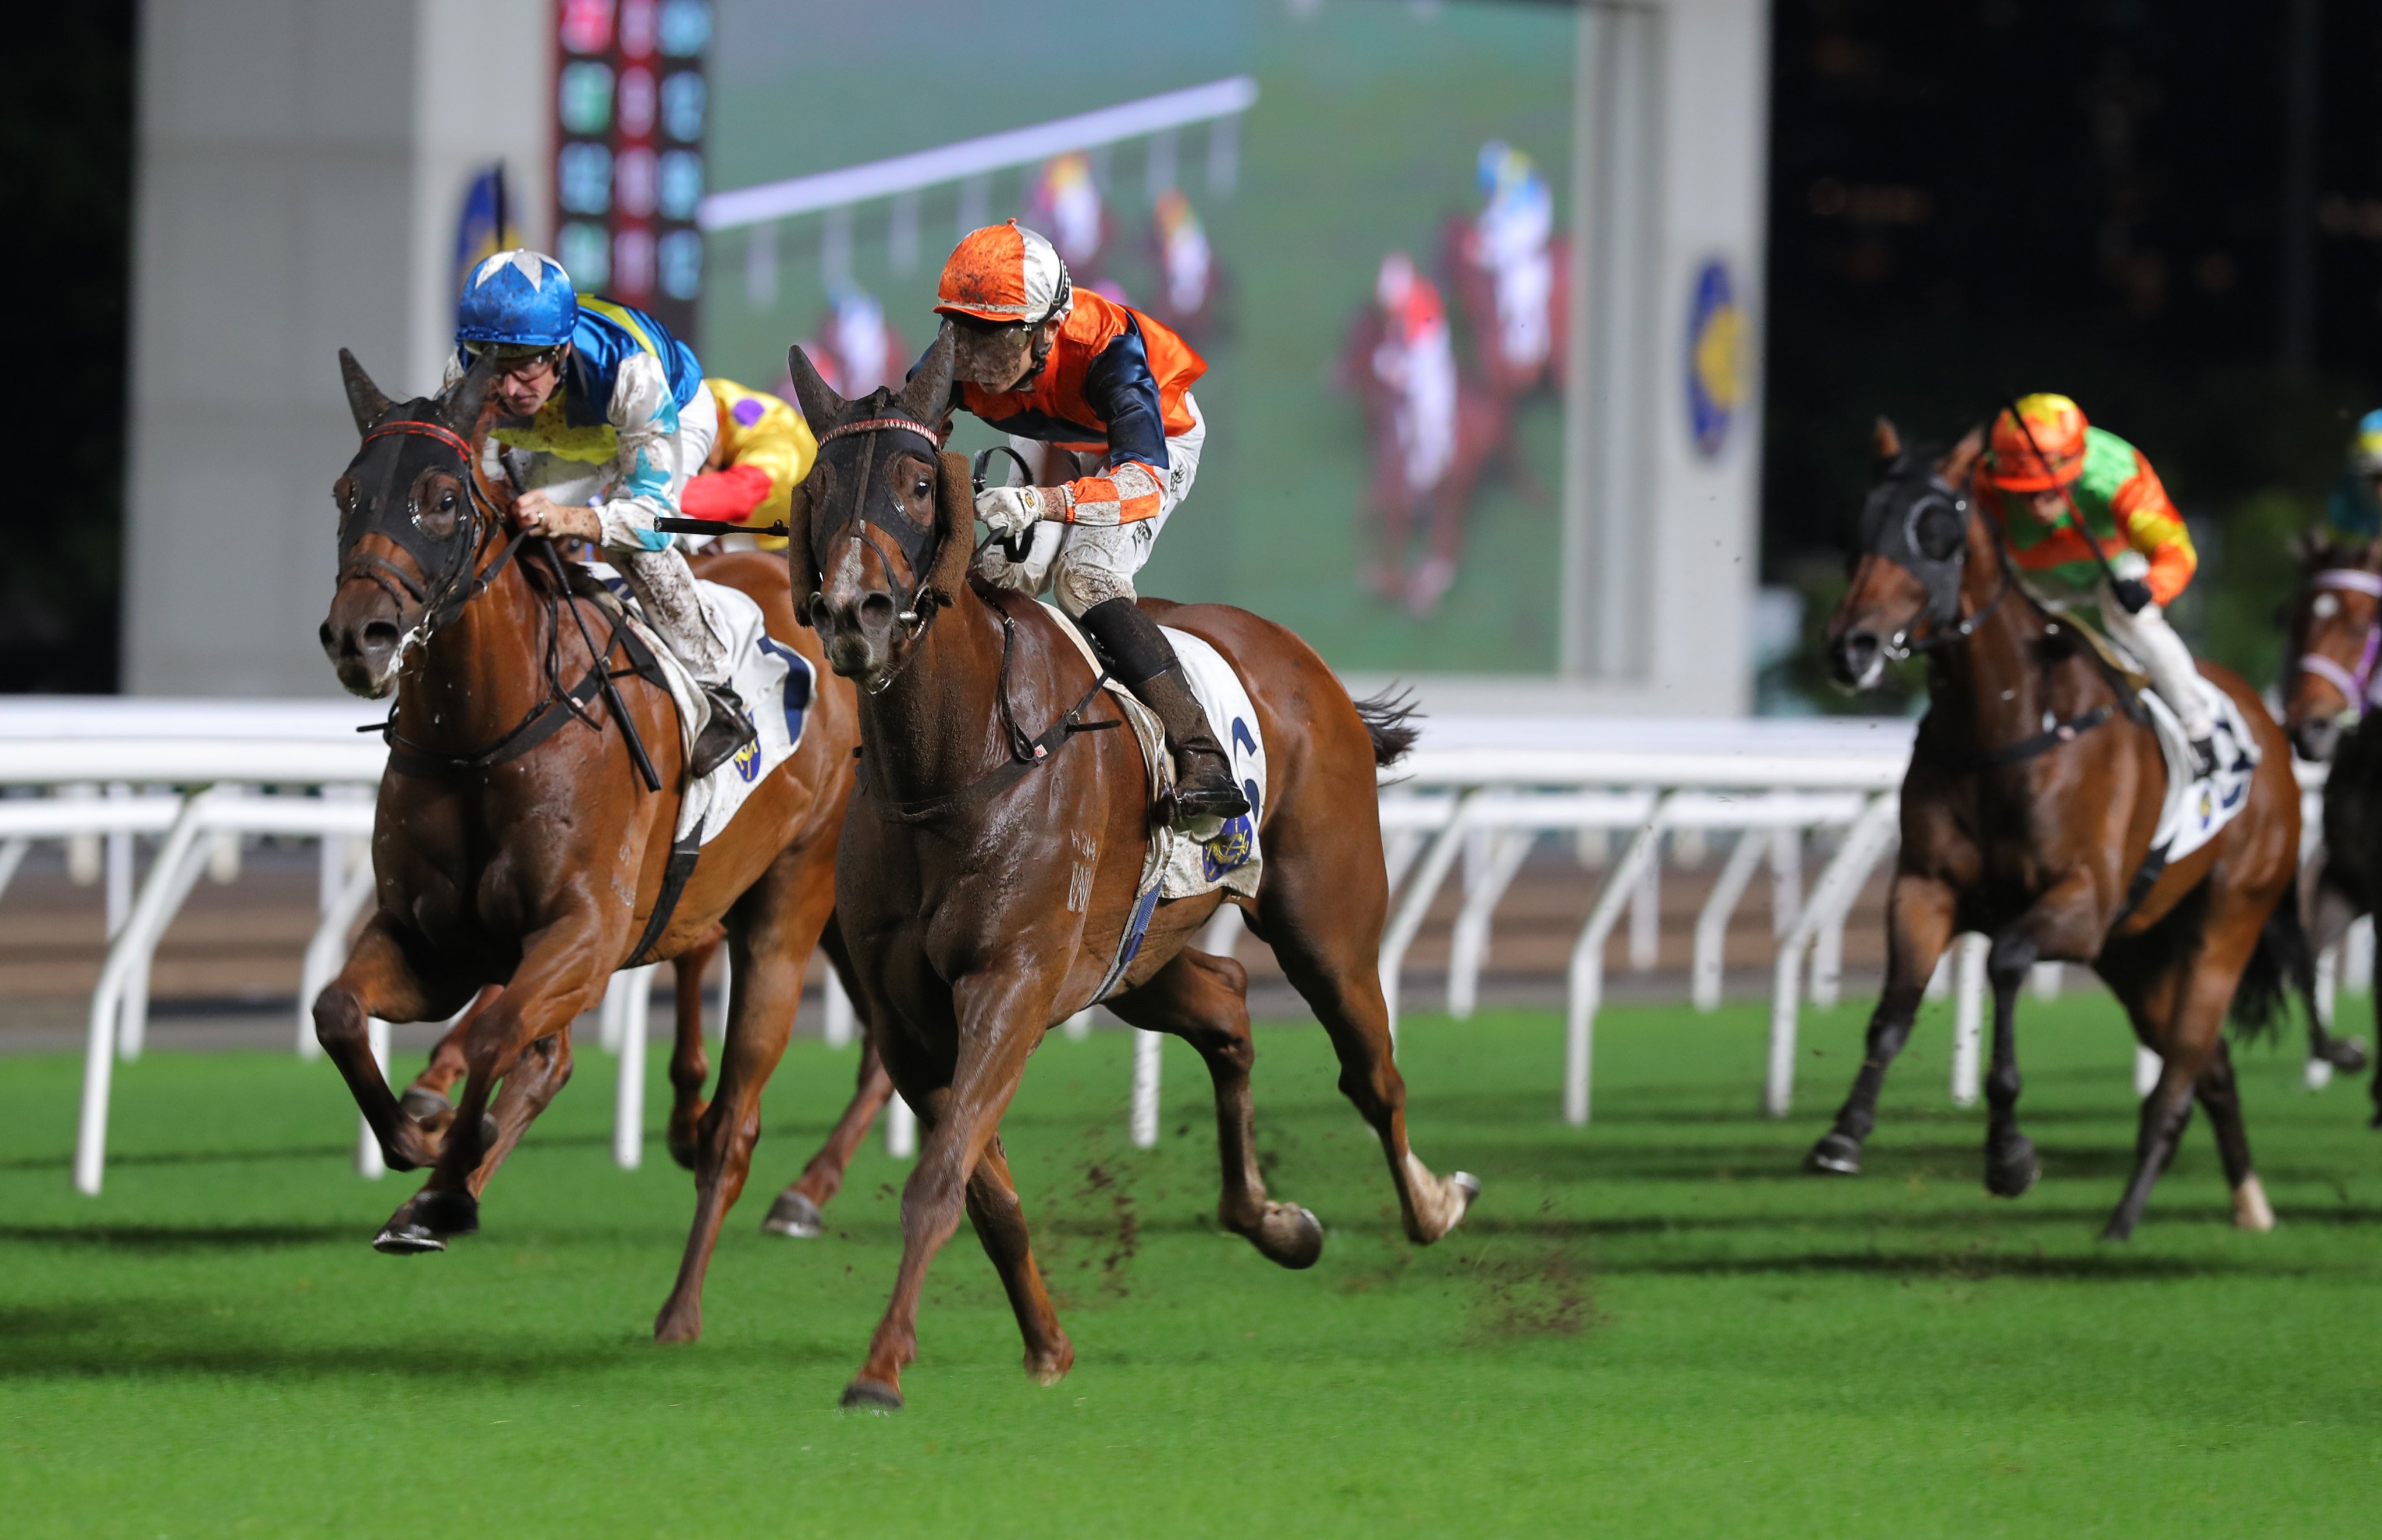 Jerry Chau guides Sunlight Power to victory at Sha Tin. Photos: Kenneth Chan